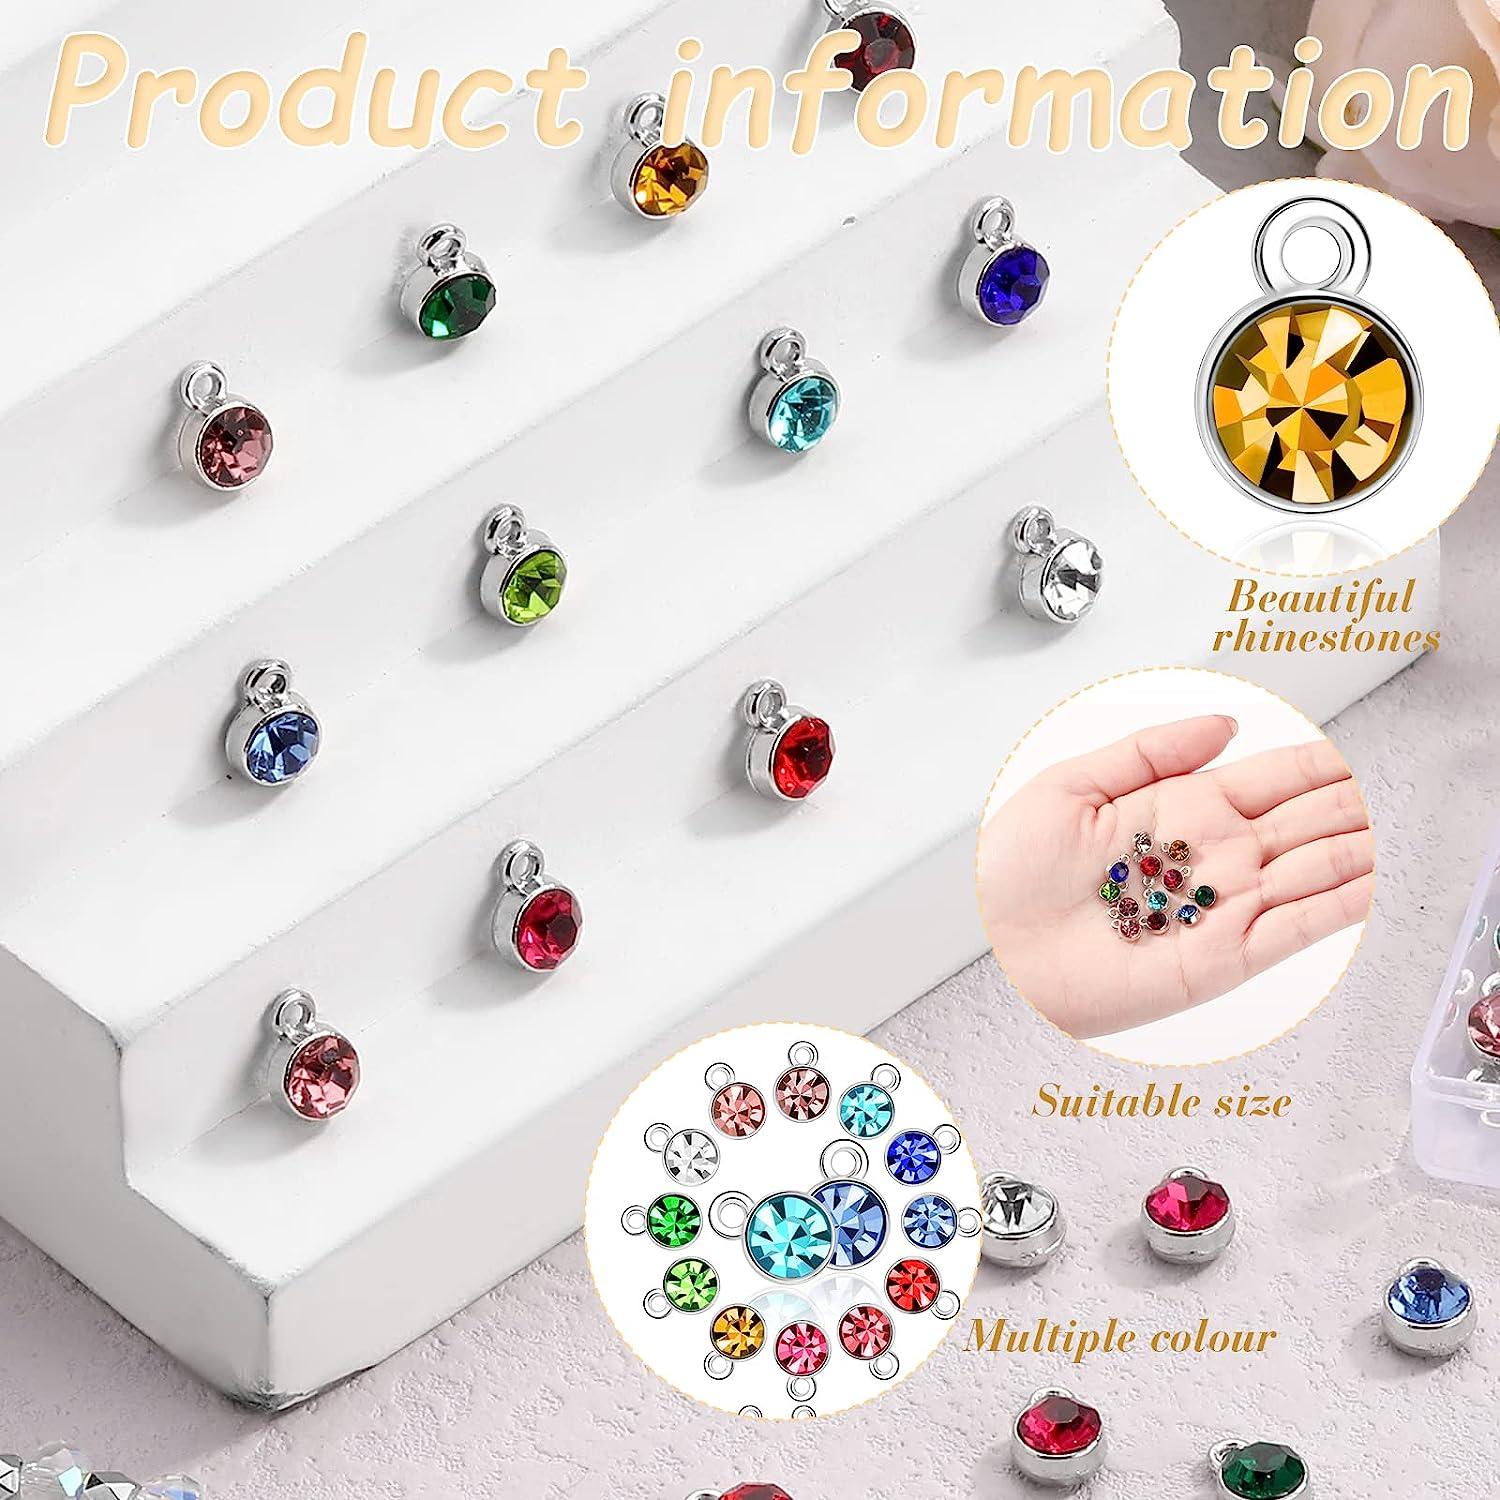 120 Pieces Charms for Jewelry Making Birthstone Charms Earring Charms  Flower Charms Silver Charms Bling Charms Enamel Charms for Jewelry Making  Earring Accessory 12 Colors (Multiple Color)